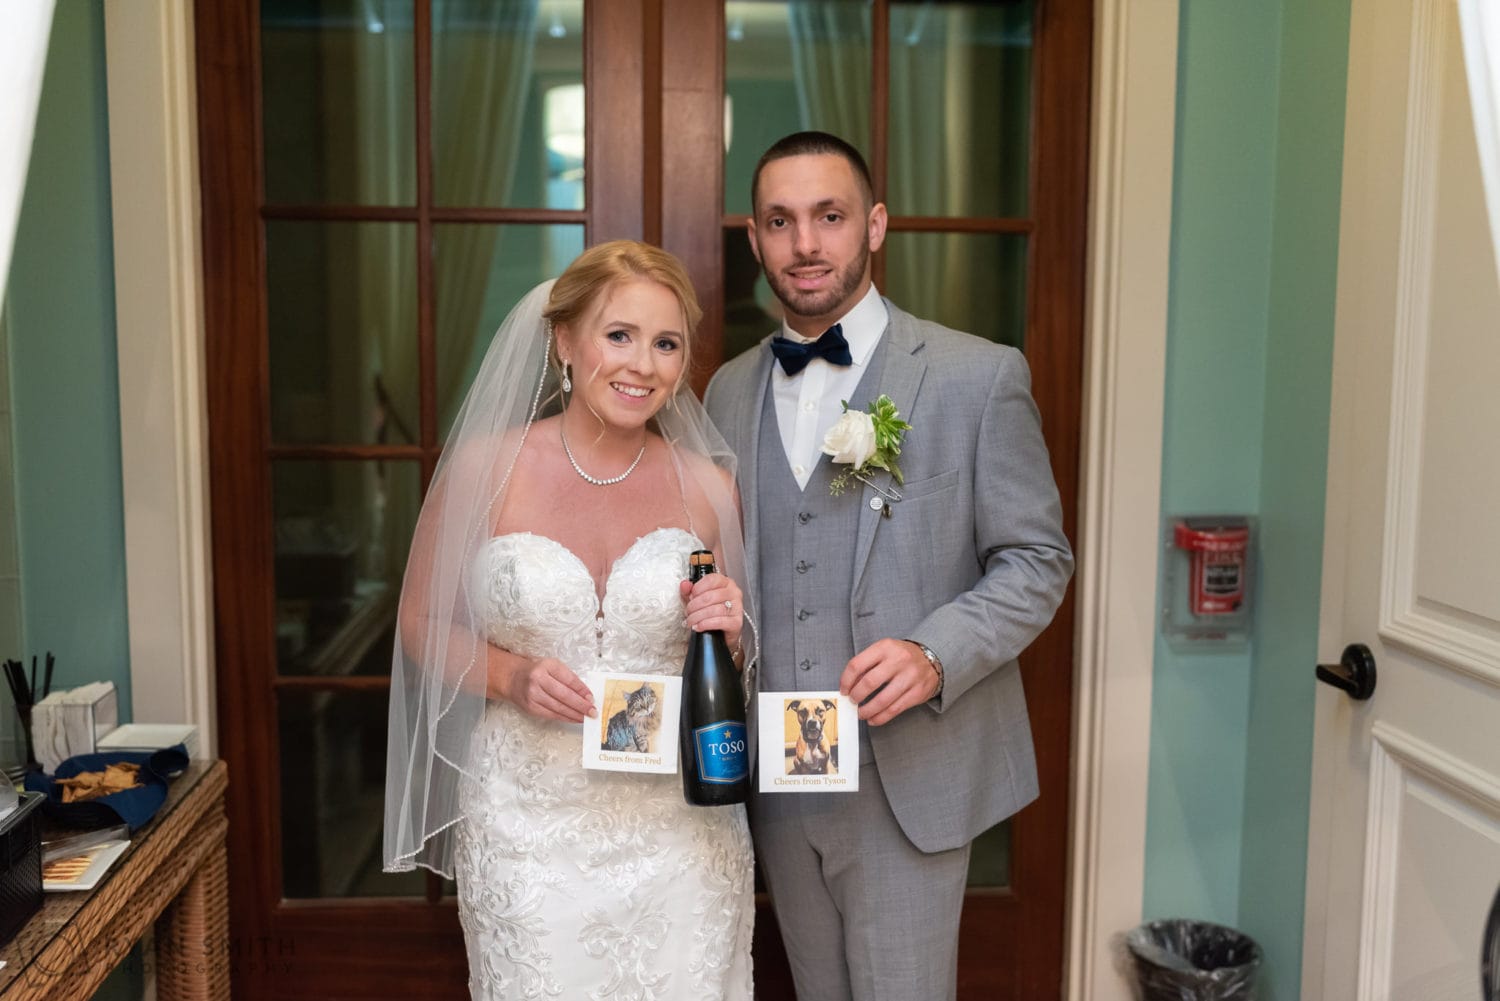 Bride and groom holding napkins with their pets pictures  - 21 Main Events - North Myrtle Beach